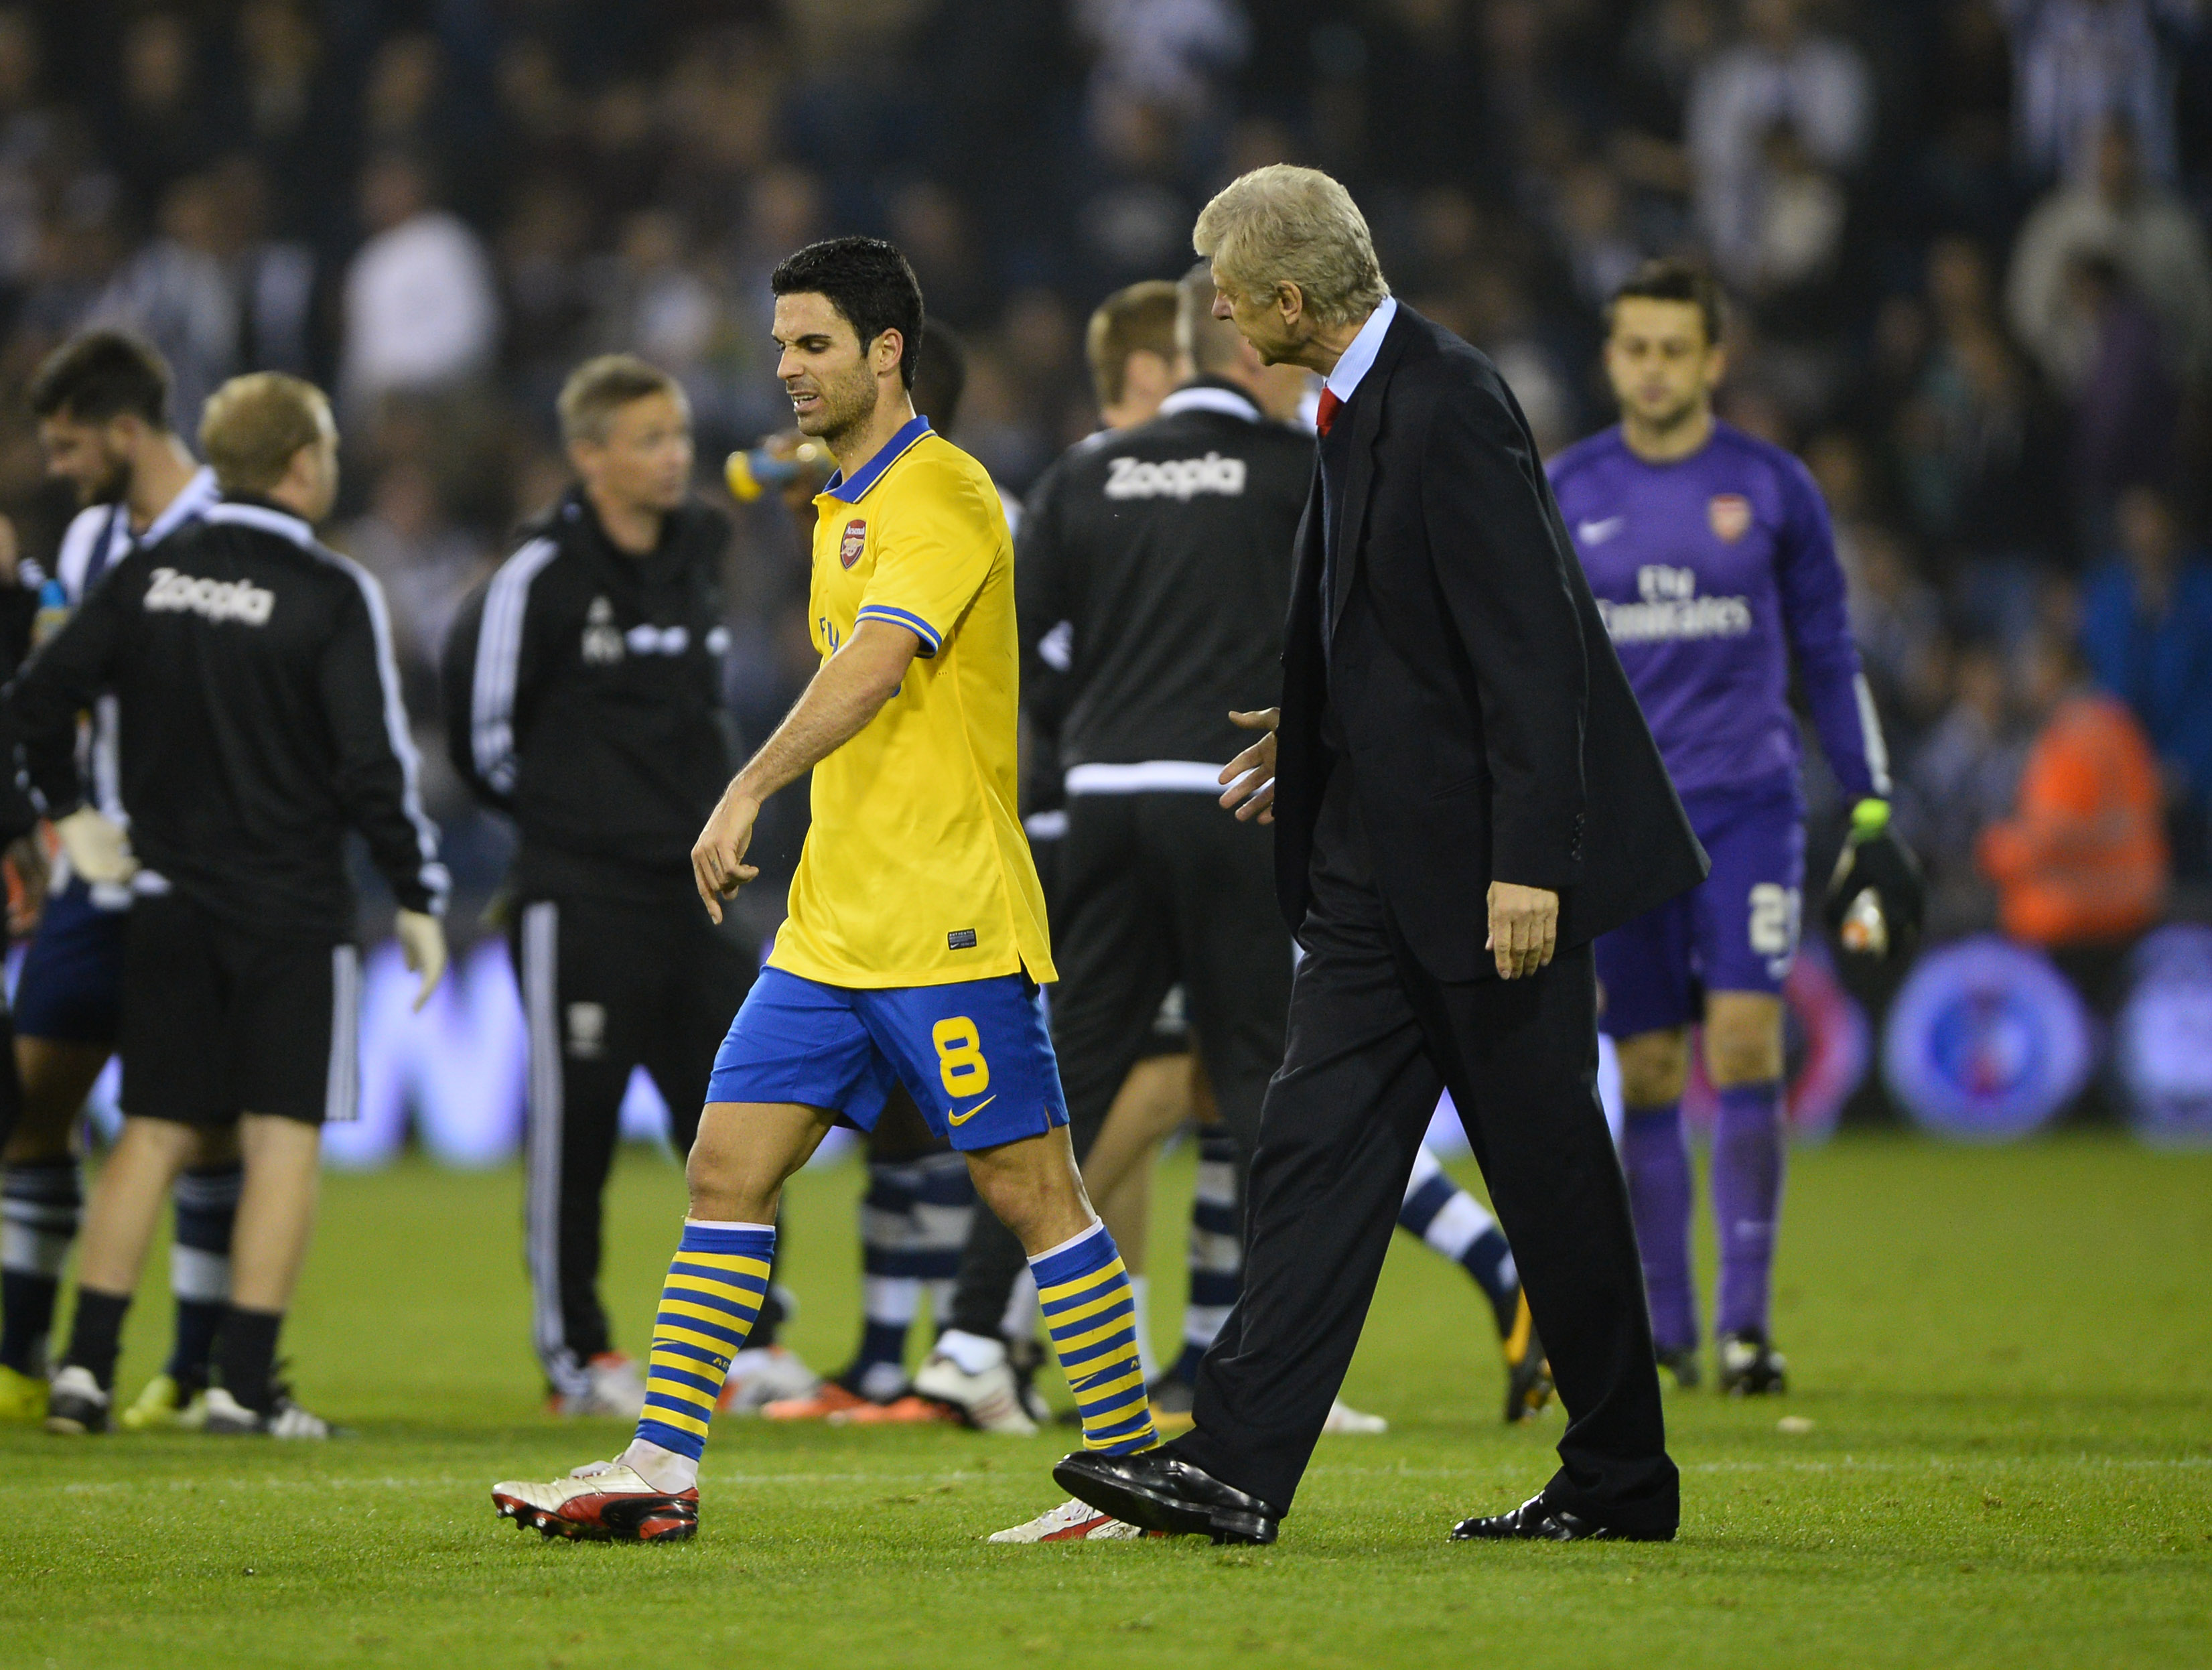 Arsenal boss Arteta: We would be delighted to have Wenger 'much closer'